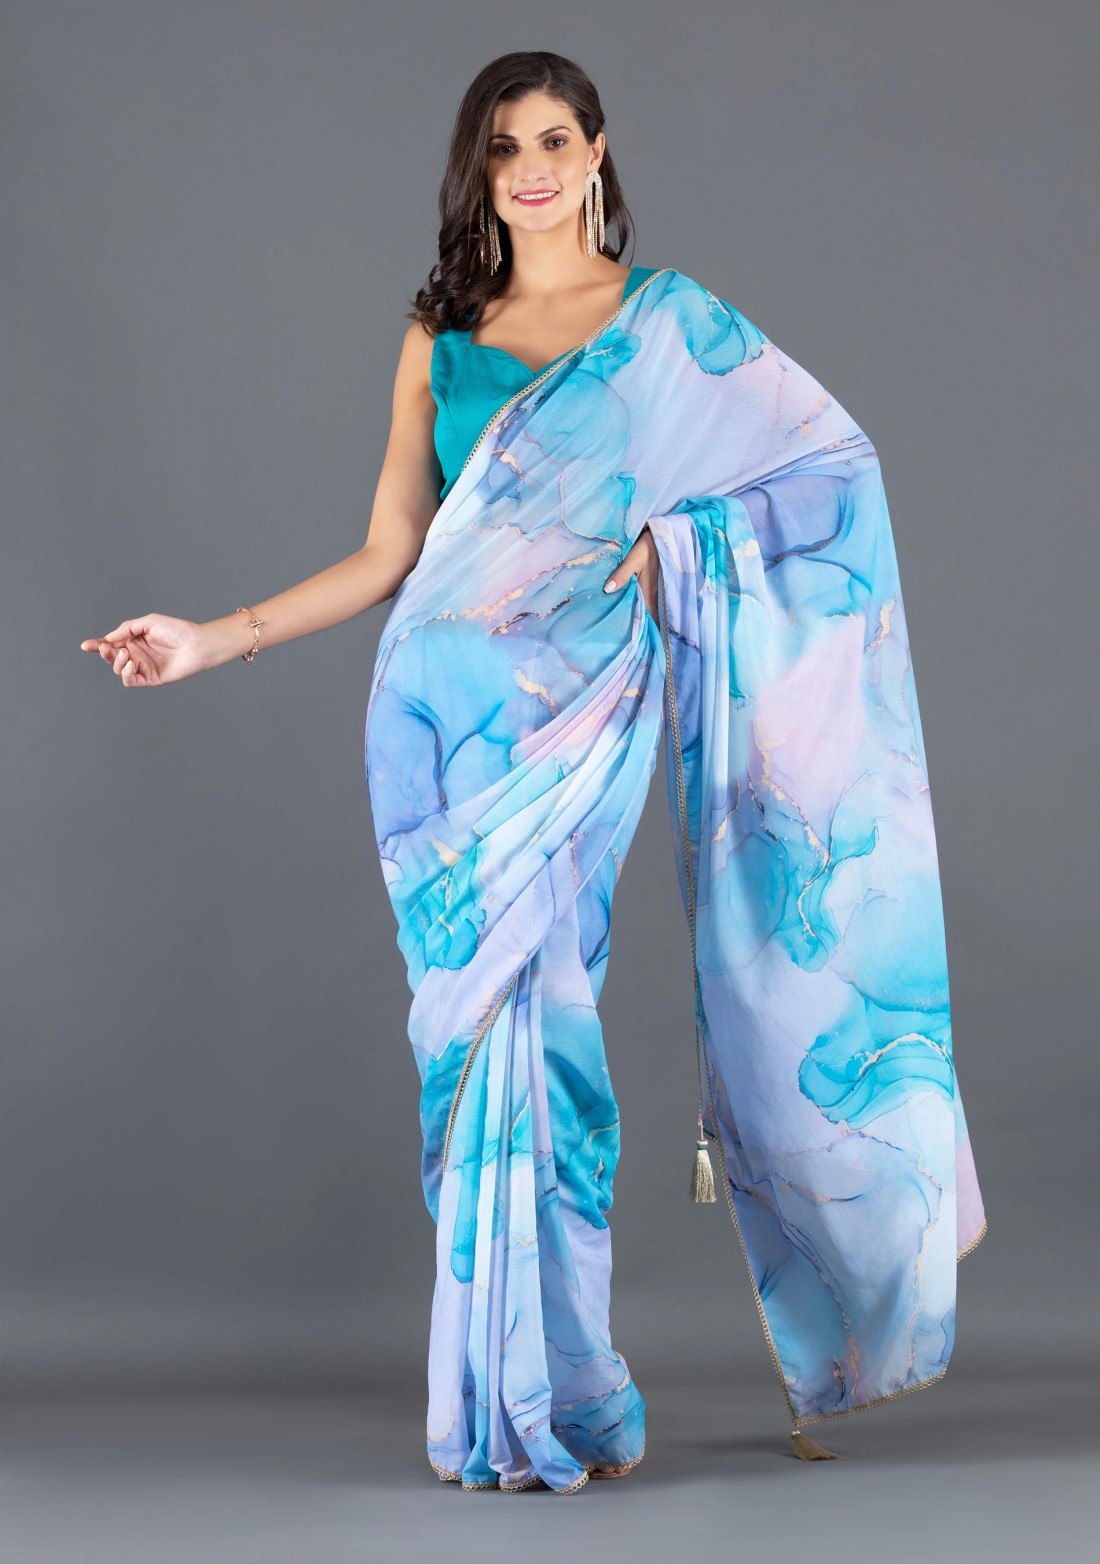 Turquoise Blue Marble print Chiffon Saree With Unstitched Blouse